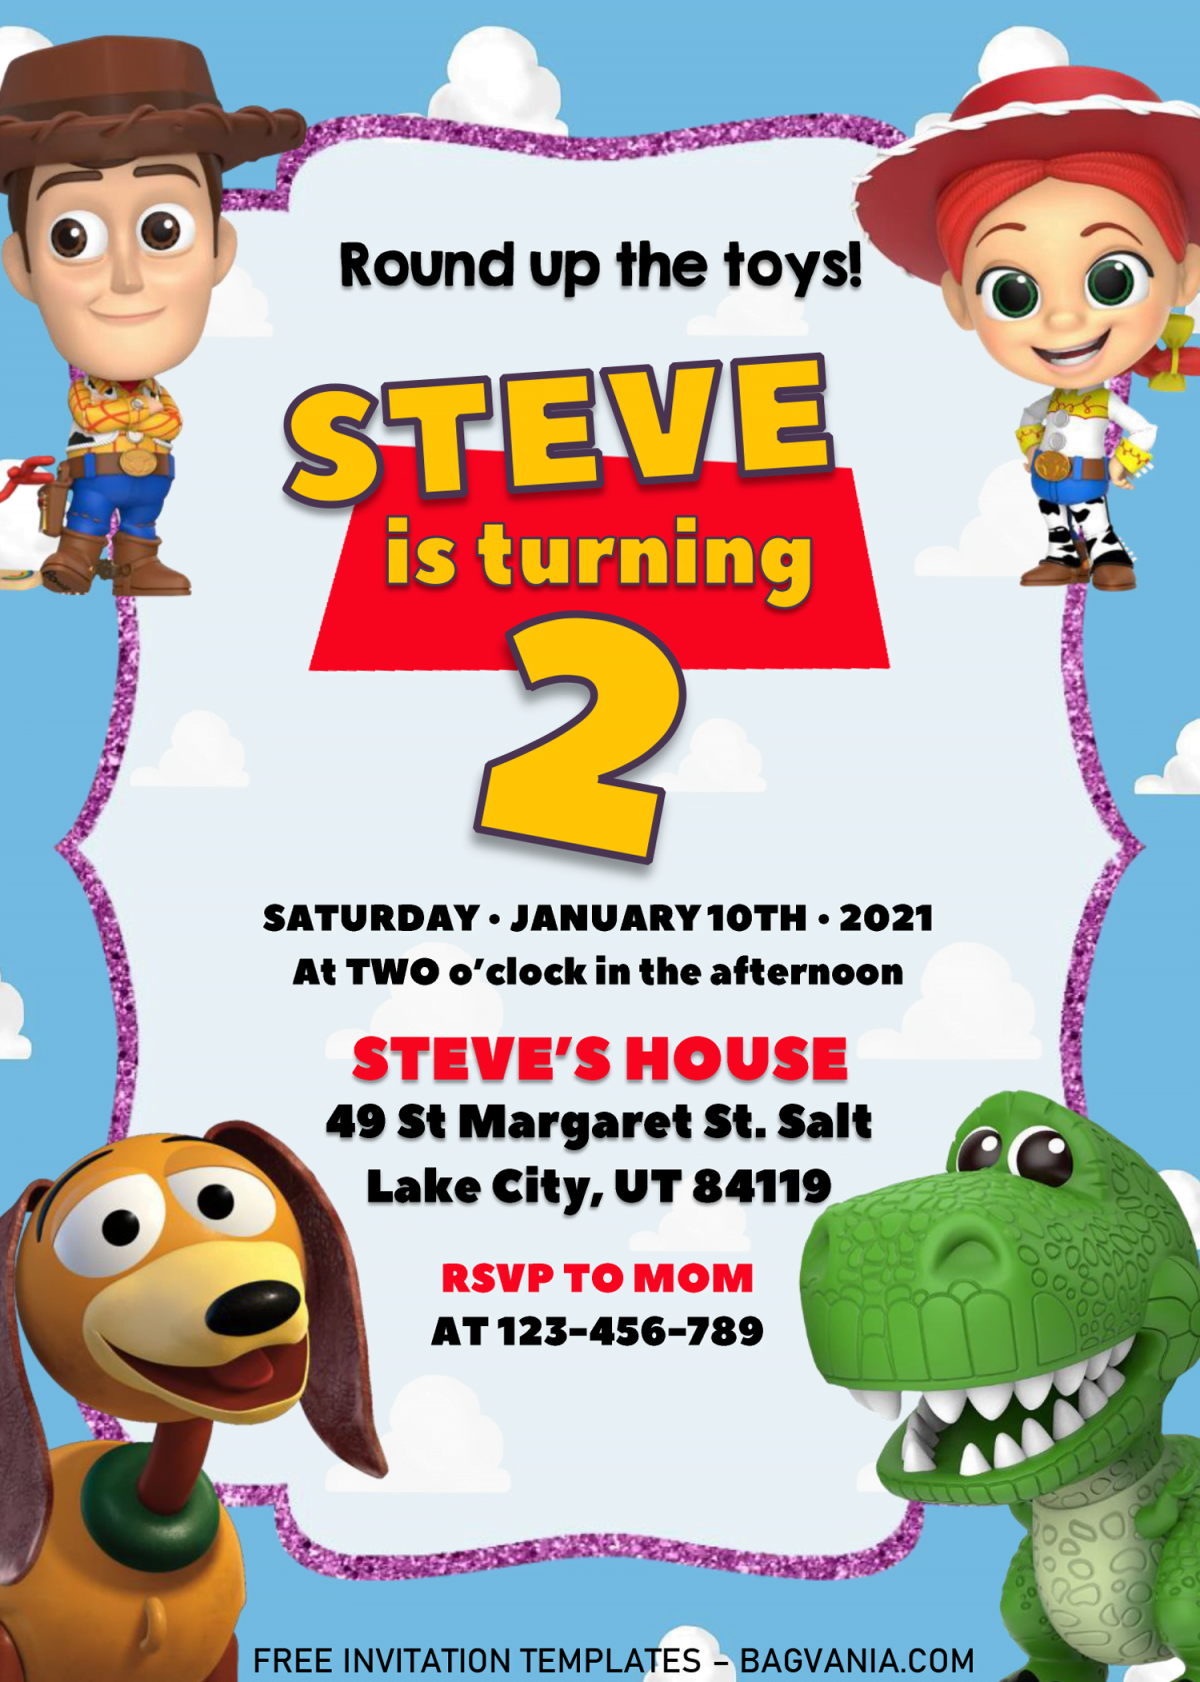 Toy Story Invitation Templates - Editable With MS Word and has blue background